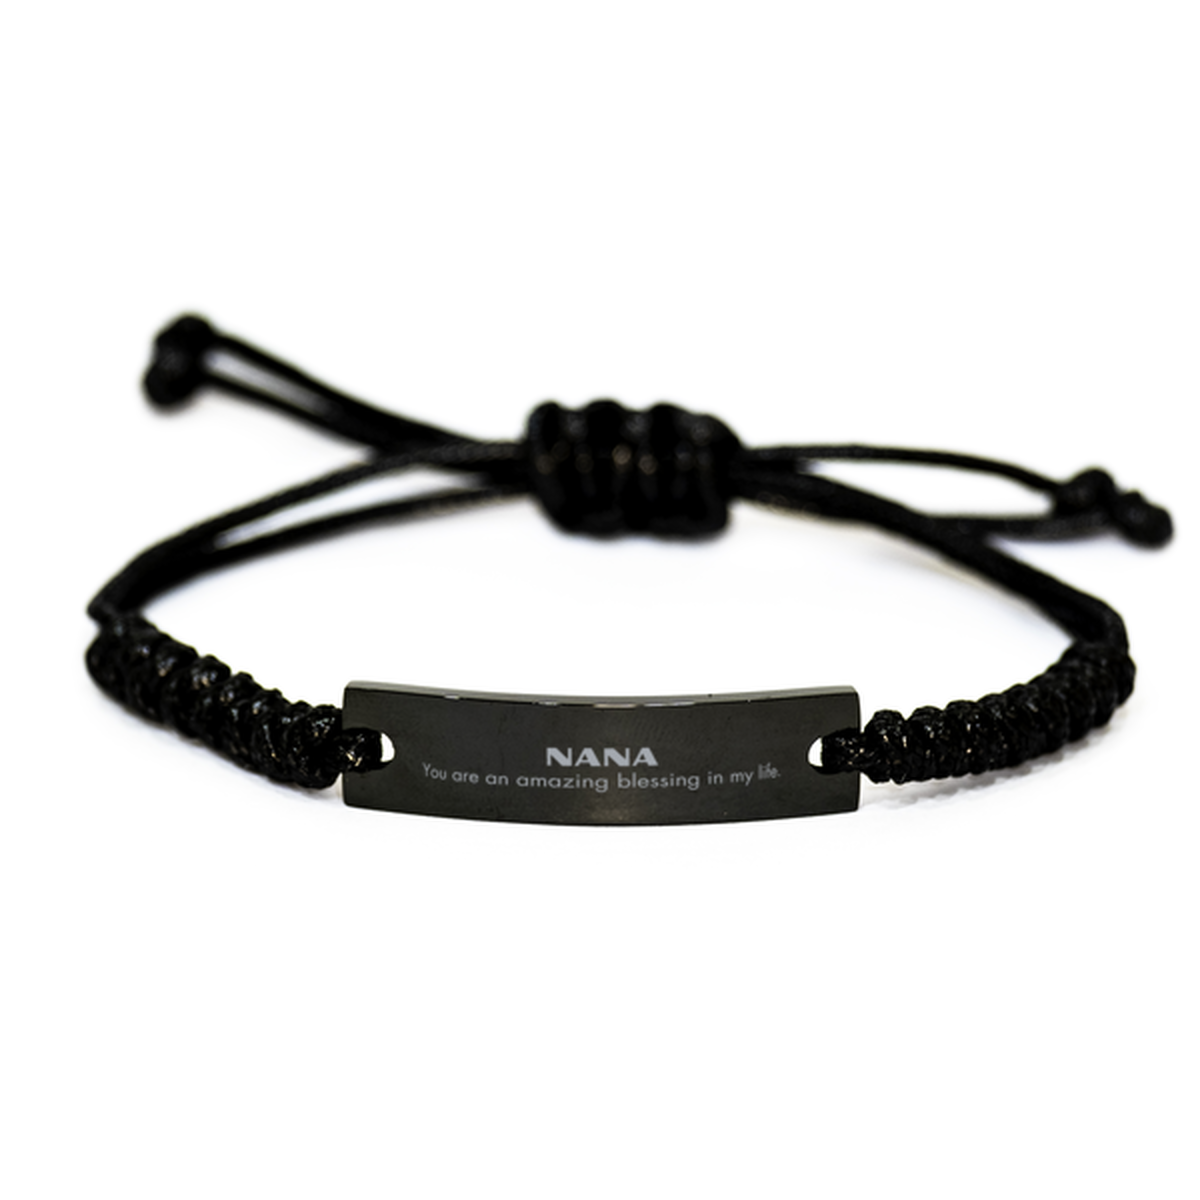 Nana Black Rope Bracelet, You are an amazing blessing in my life, Thank You Gifts For Nana, Inspirational Birthday Christmas Unique Gifts For Nana